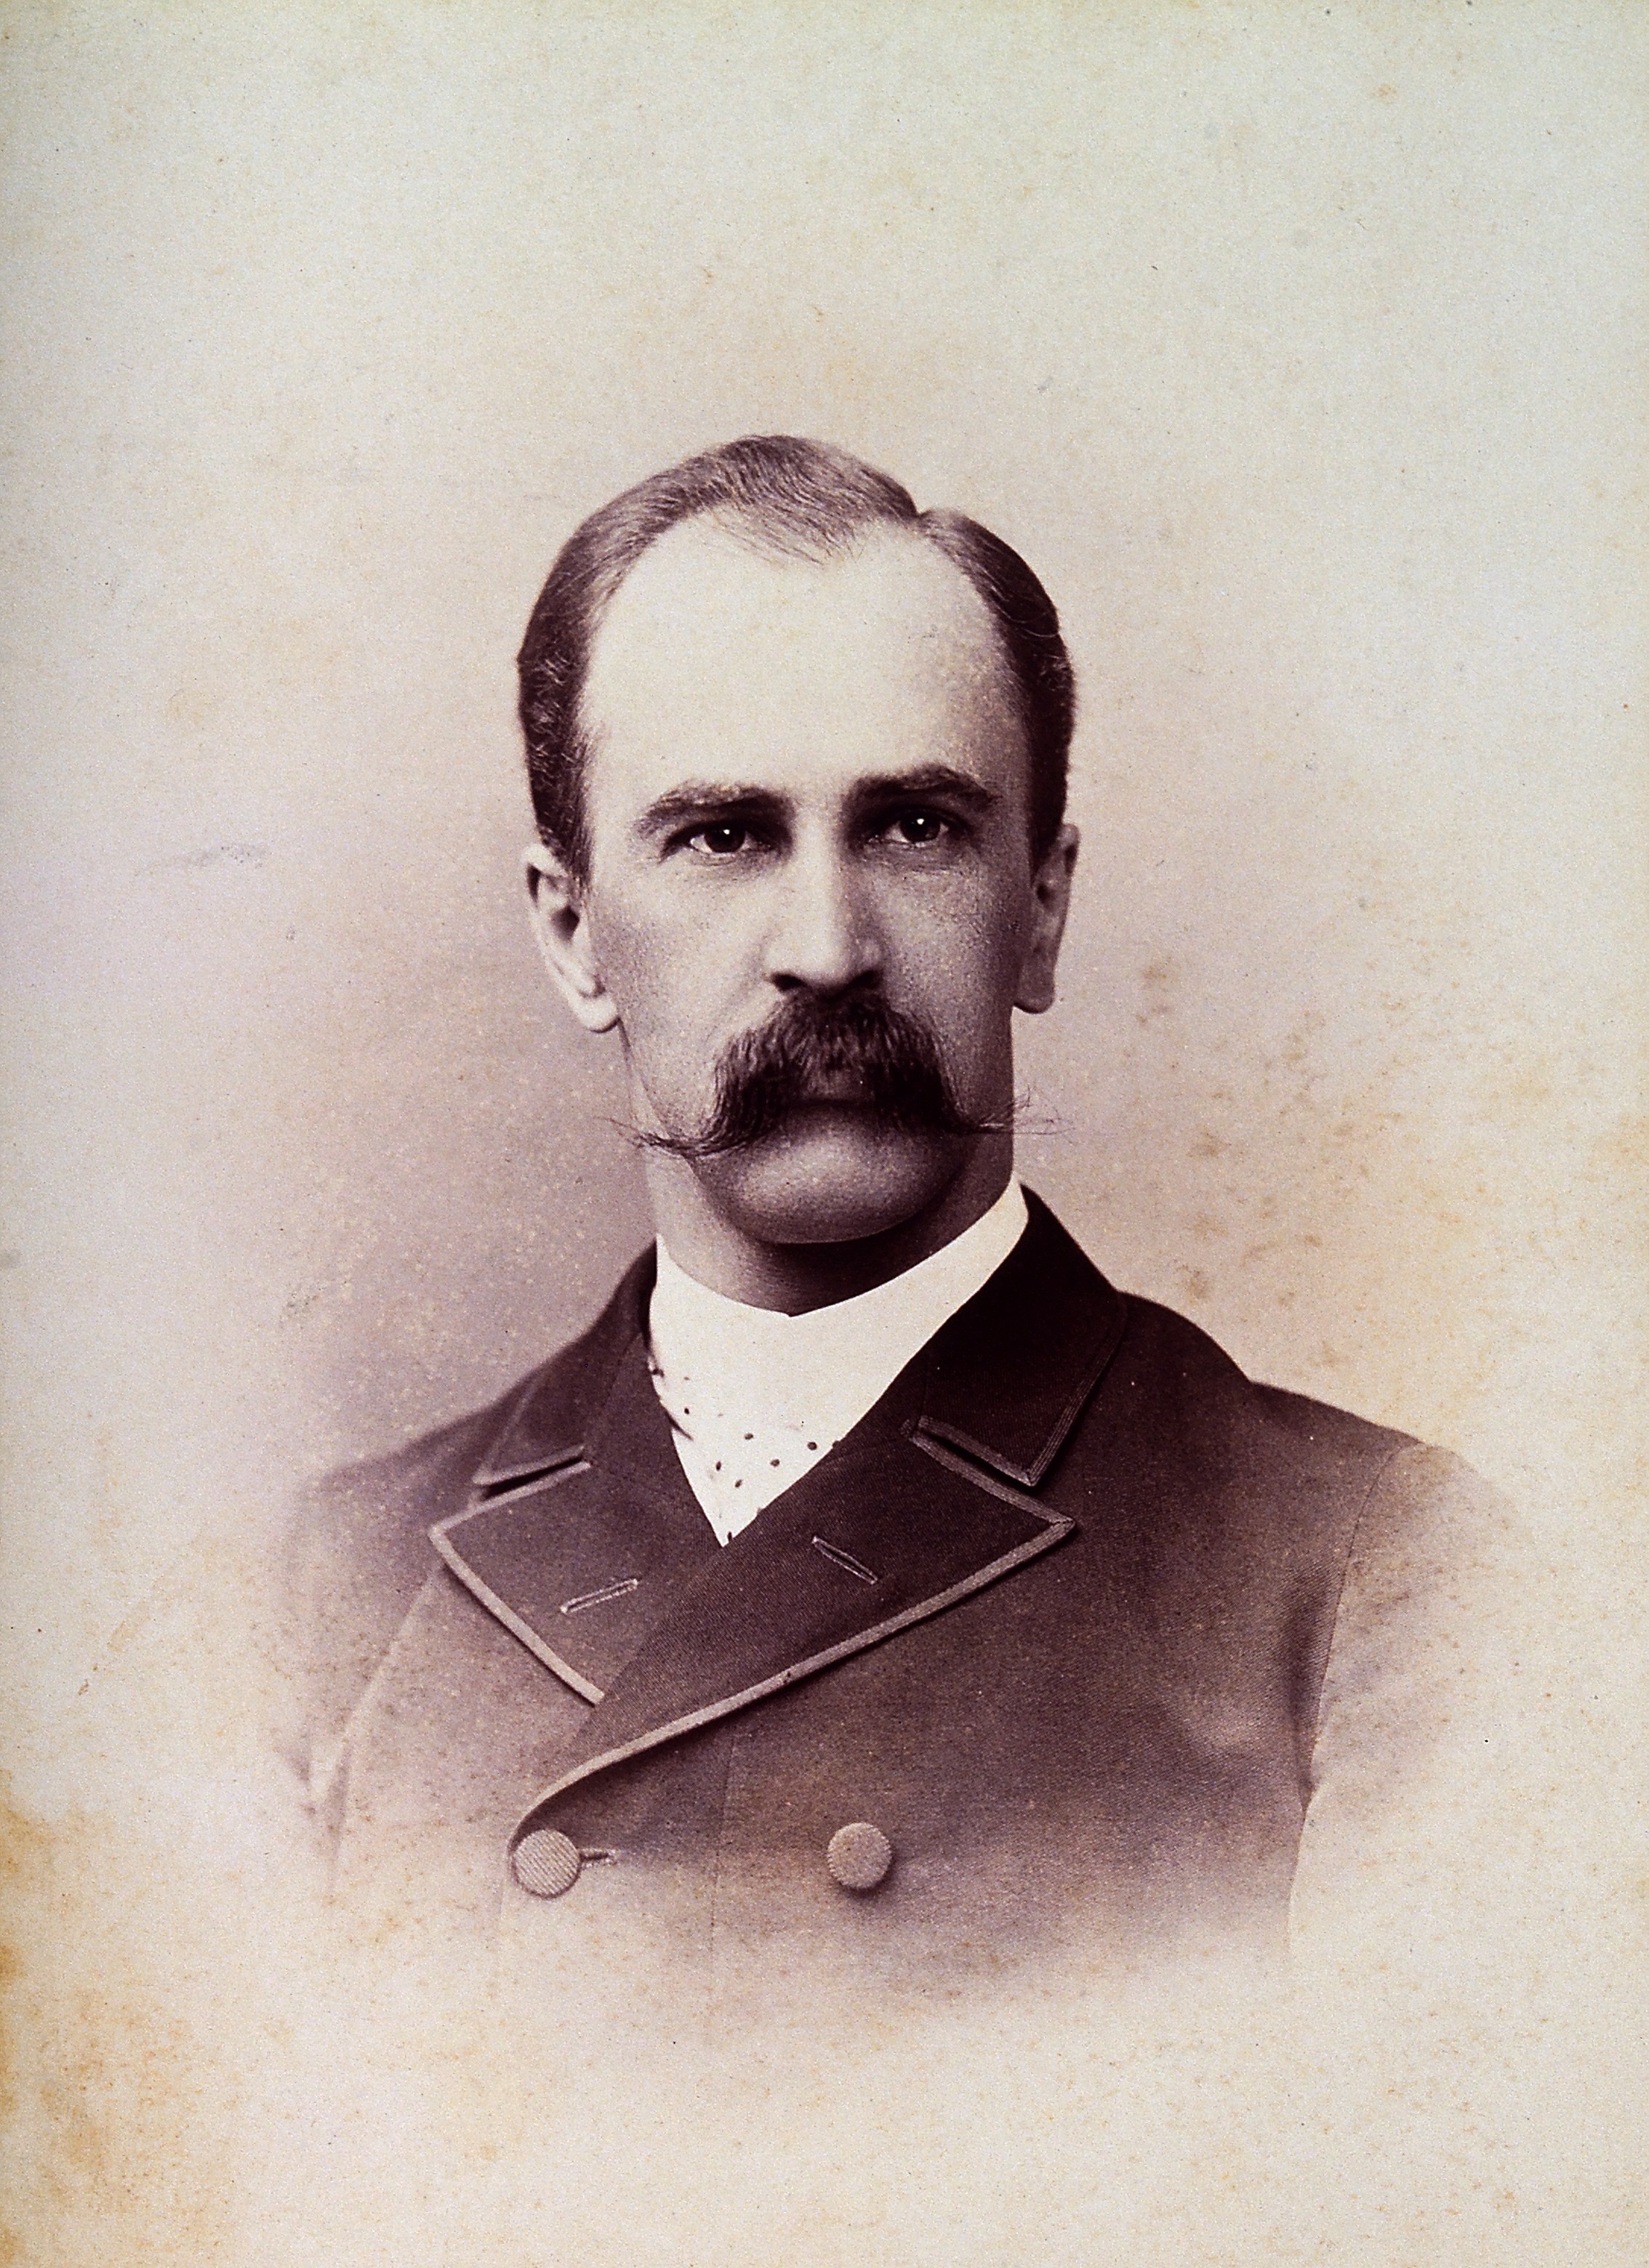 Sir William Osler. Photograph by Phillips. Wellcome V0026939